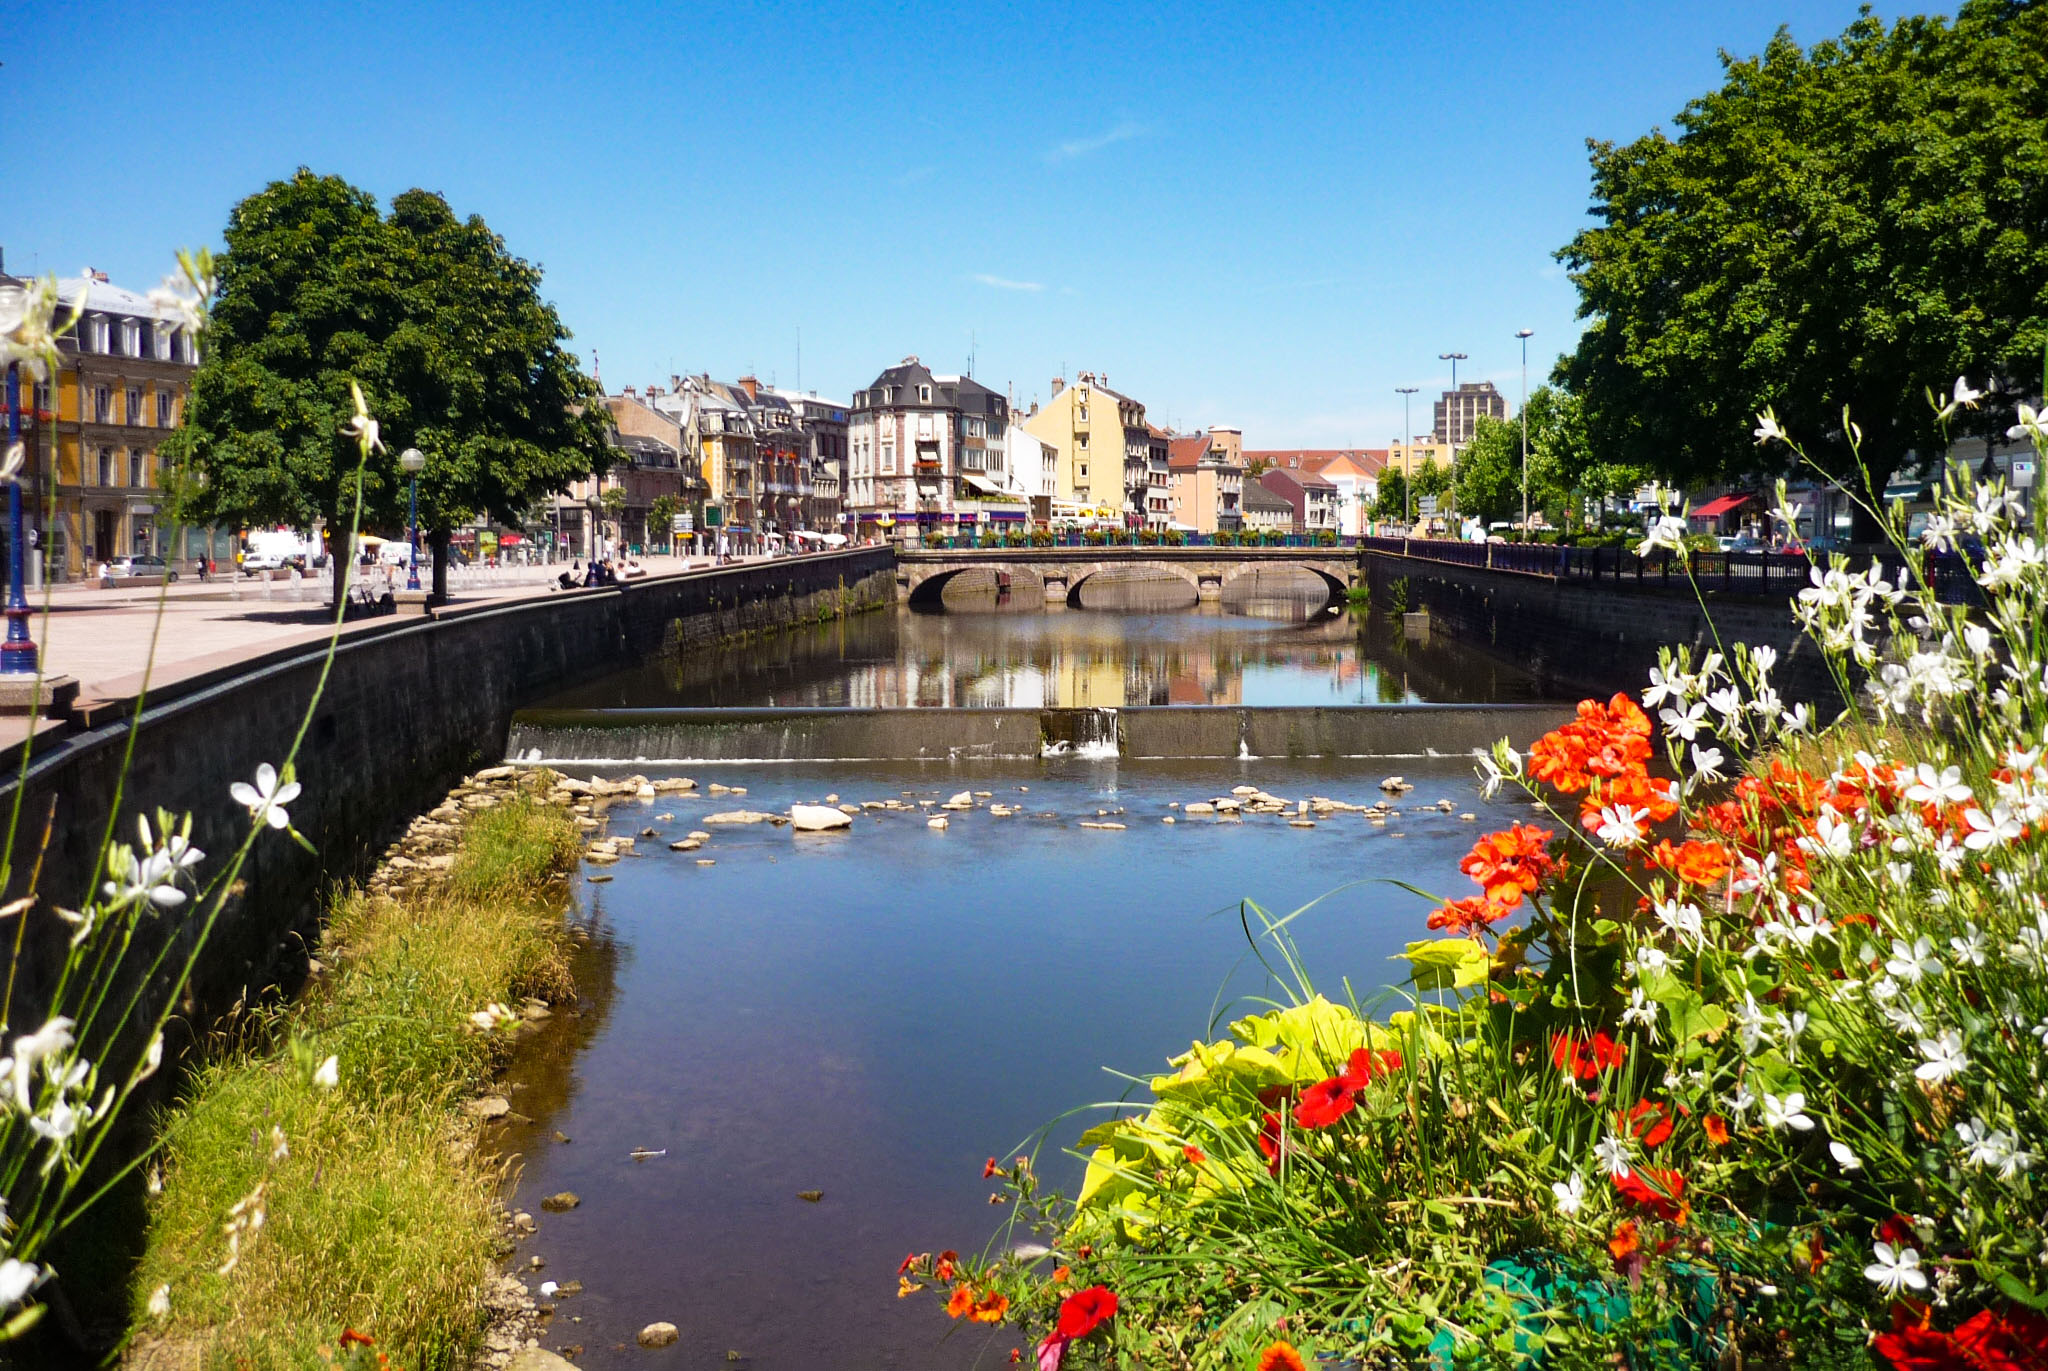 The Savoureuse River in Belfort © French Moments